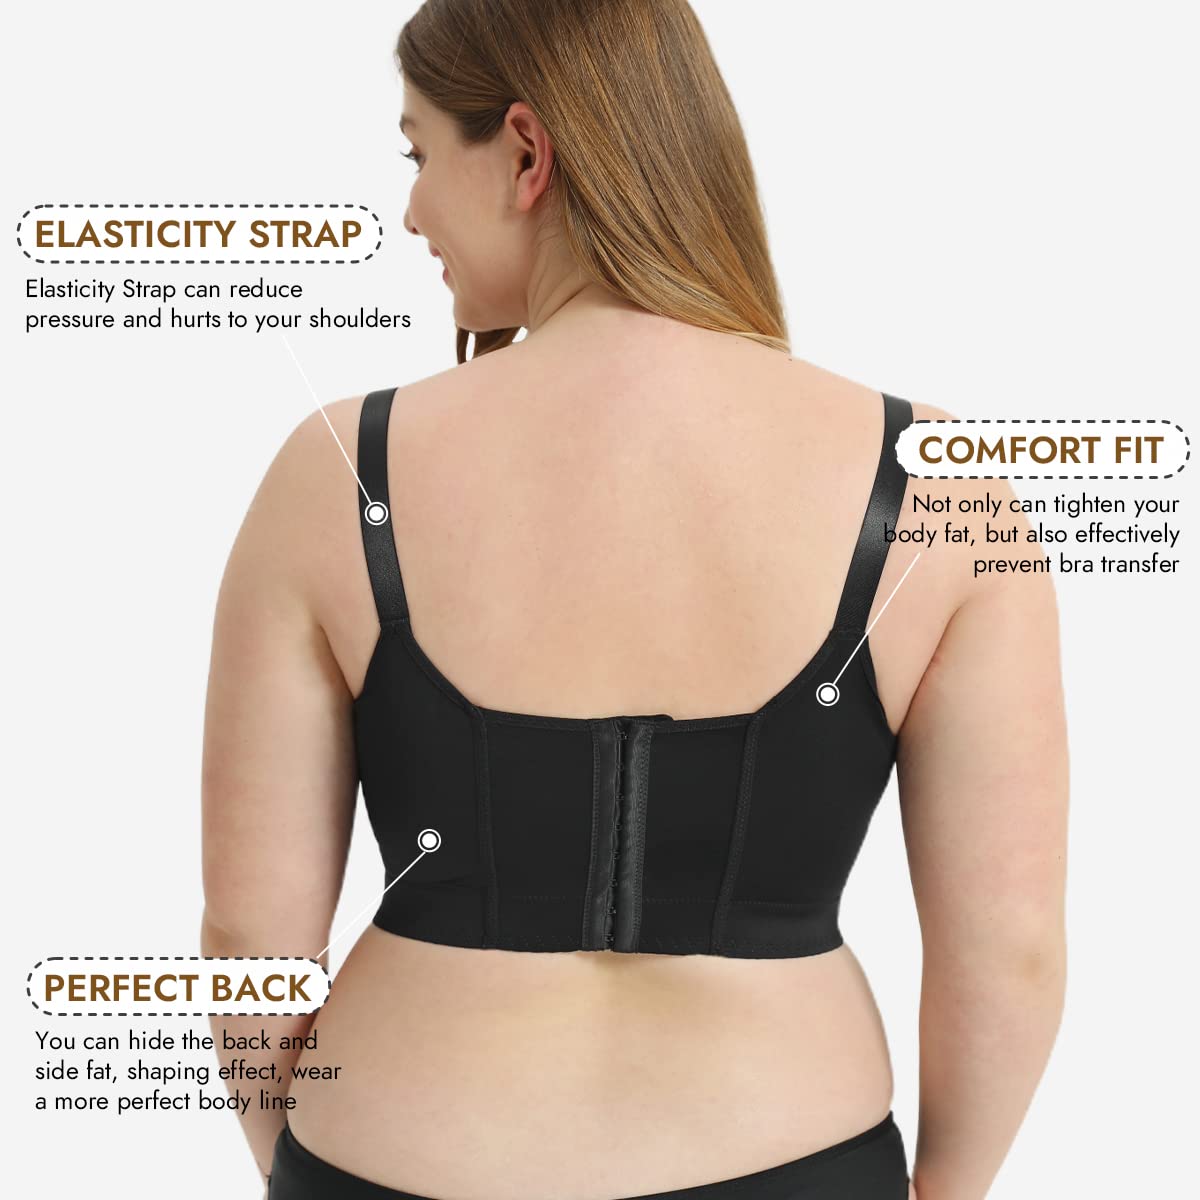 Woobilly Deep Cup Bra, Full-Back Coverage Bra Hides Back Fat